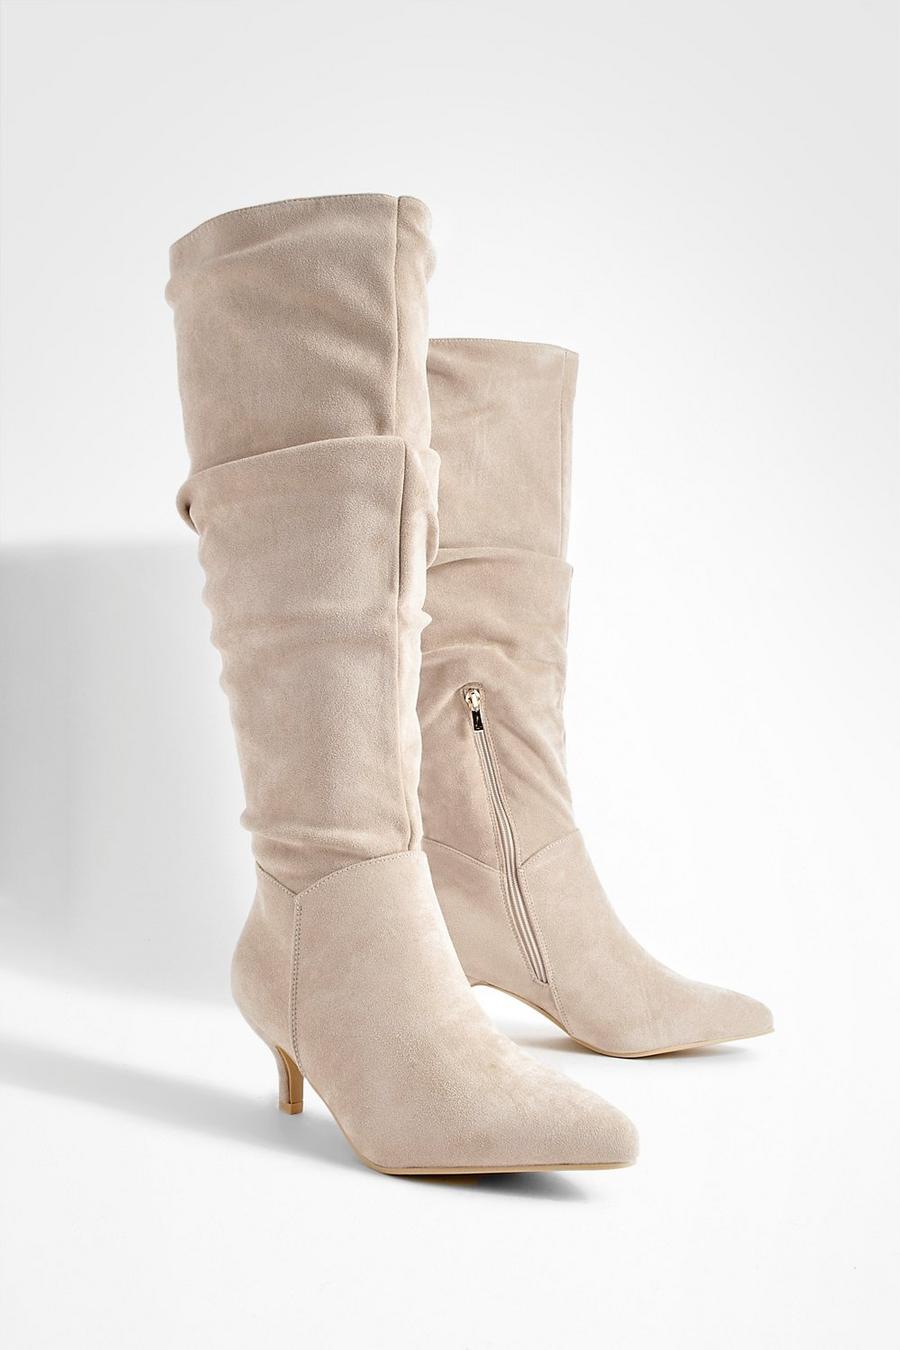 Stone beige Low Stiletto Knee High Slouchy Boots image number 1